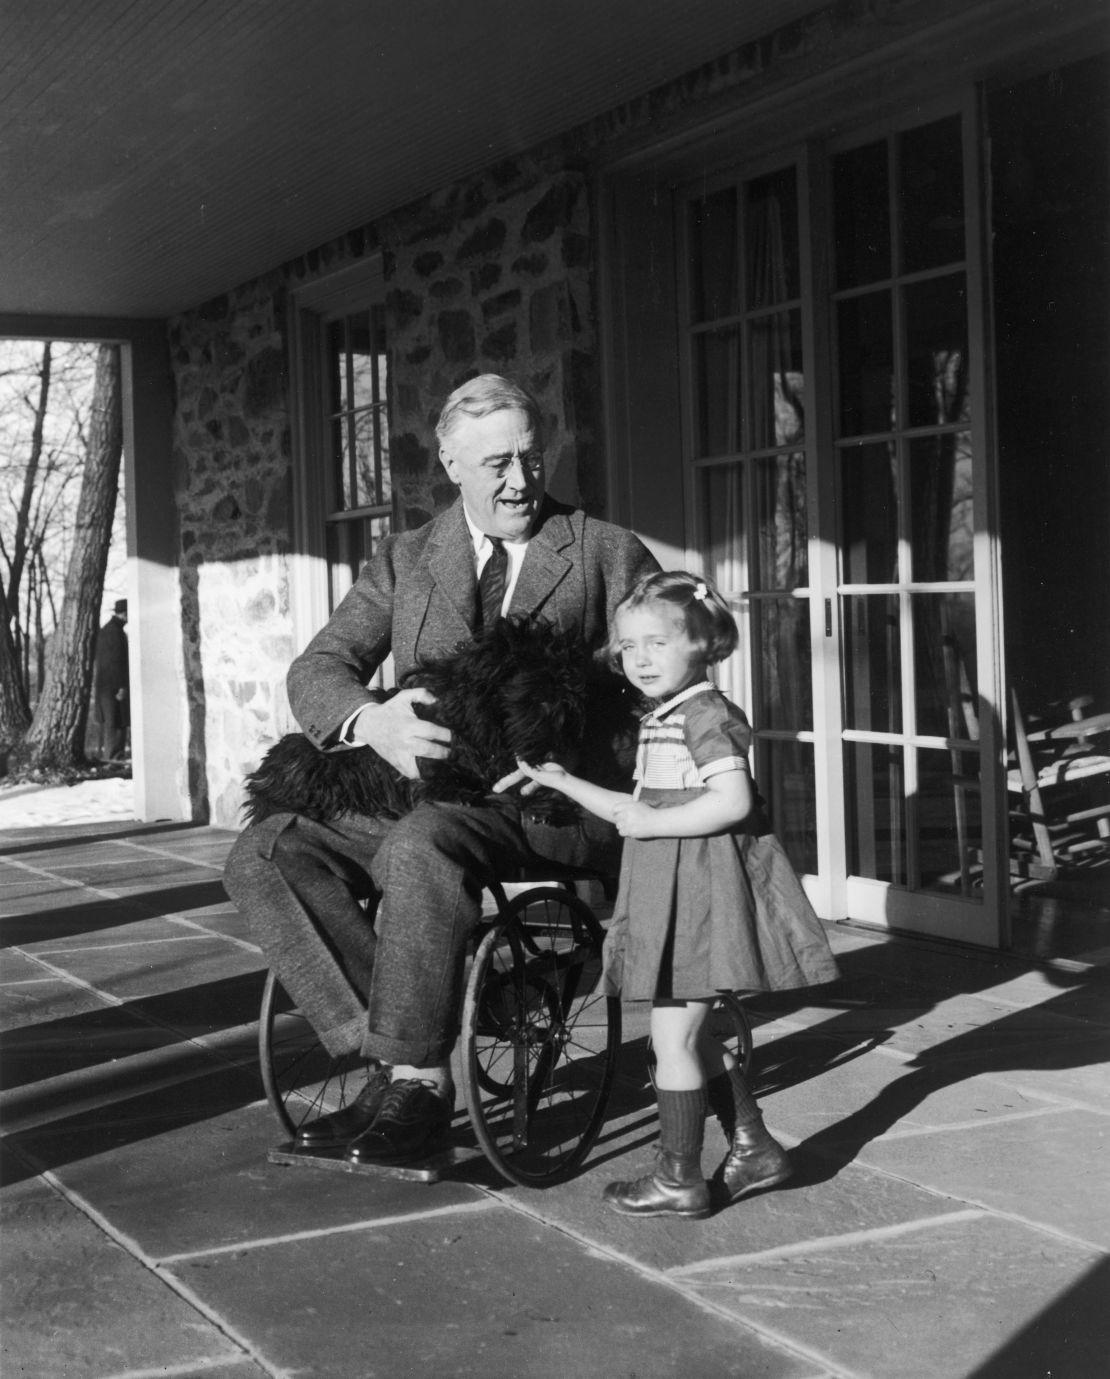 Roosevelt poses with his dog Fala and a friend granddaughter, Ruthie Bie, at Hill Top Cottage in Hyde Park New York, circa 1940s.